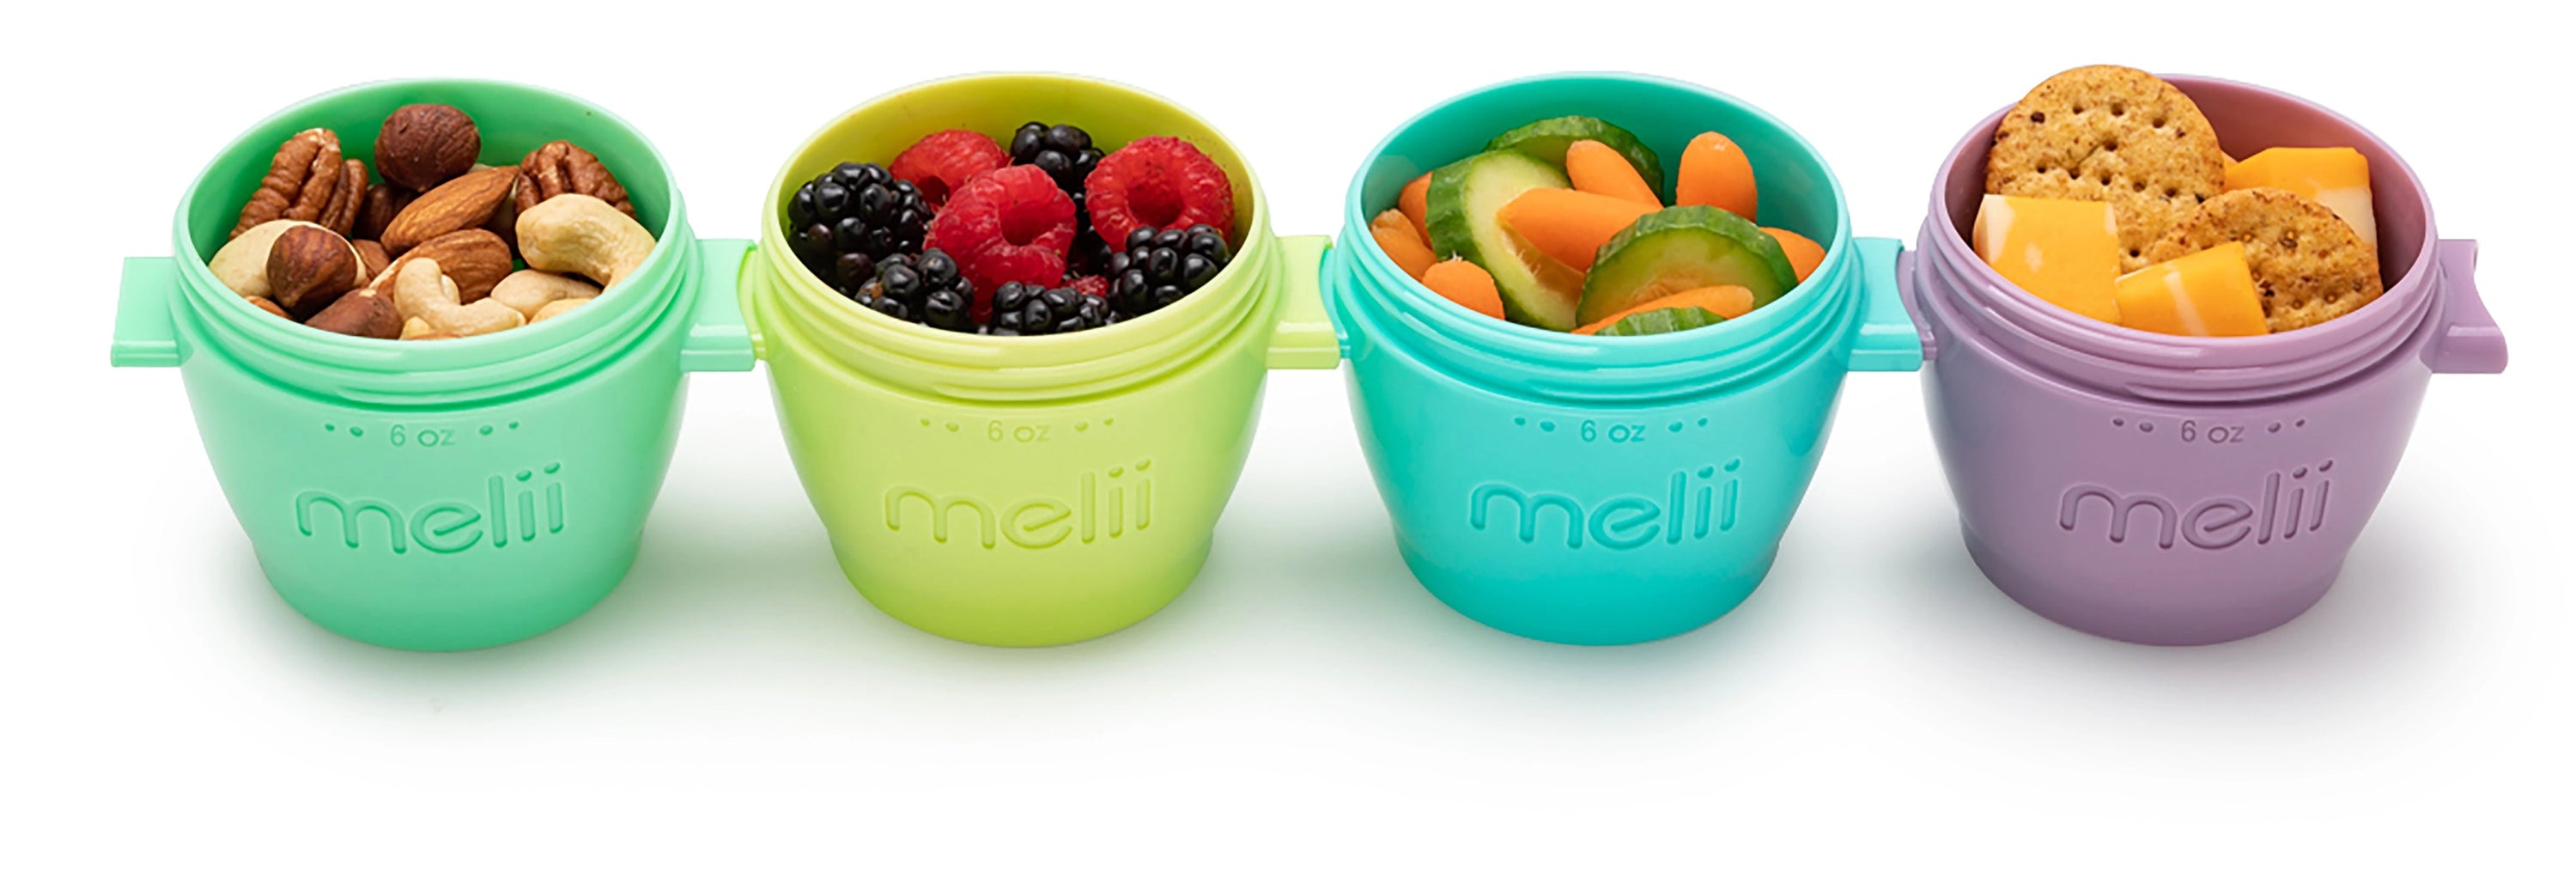 6oz Snap & Go Pods - 4 Freezer & Snack Containers